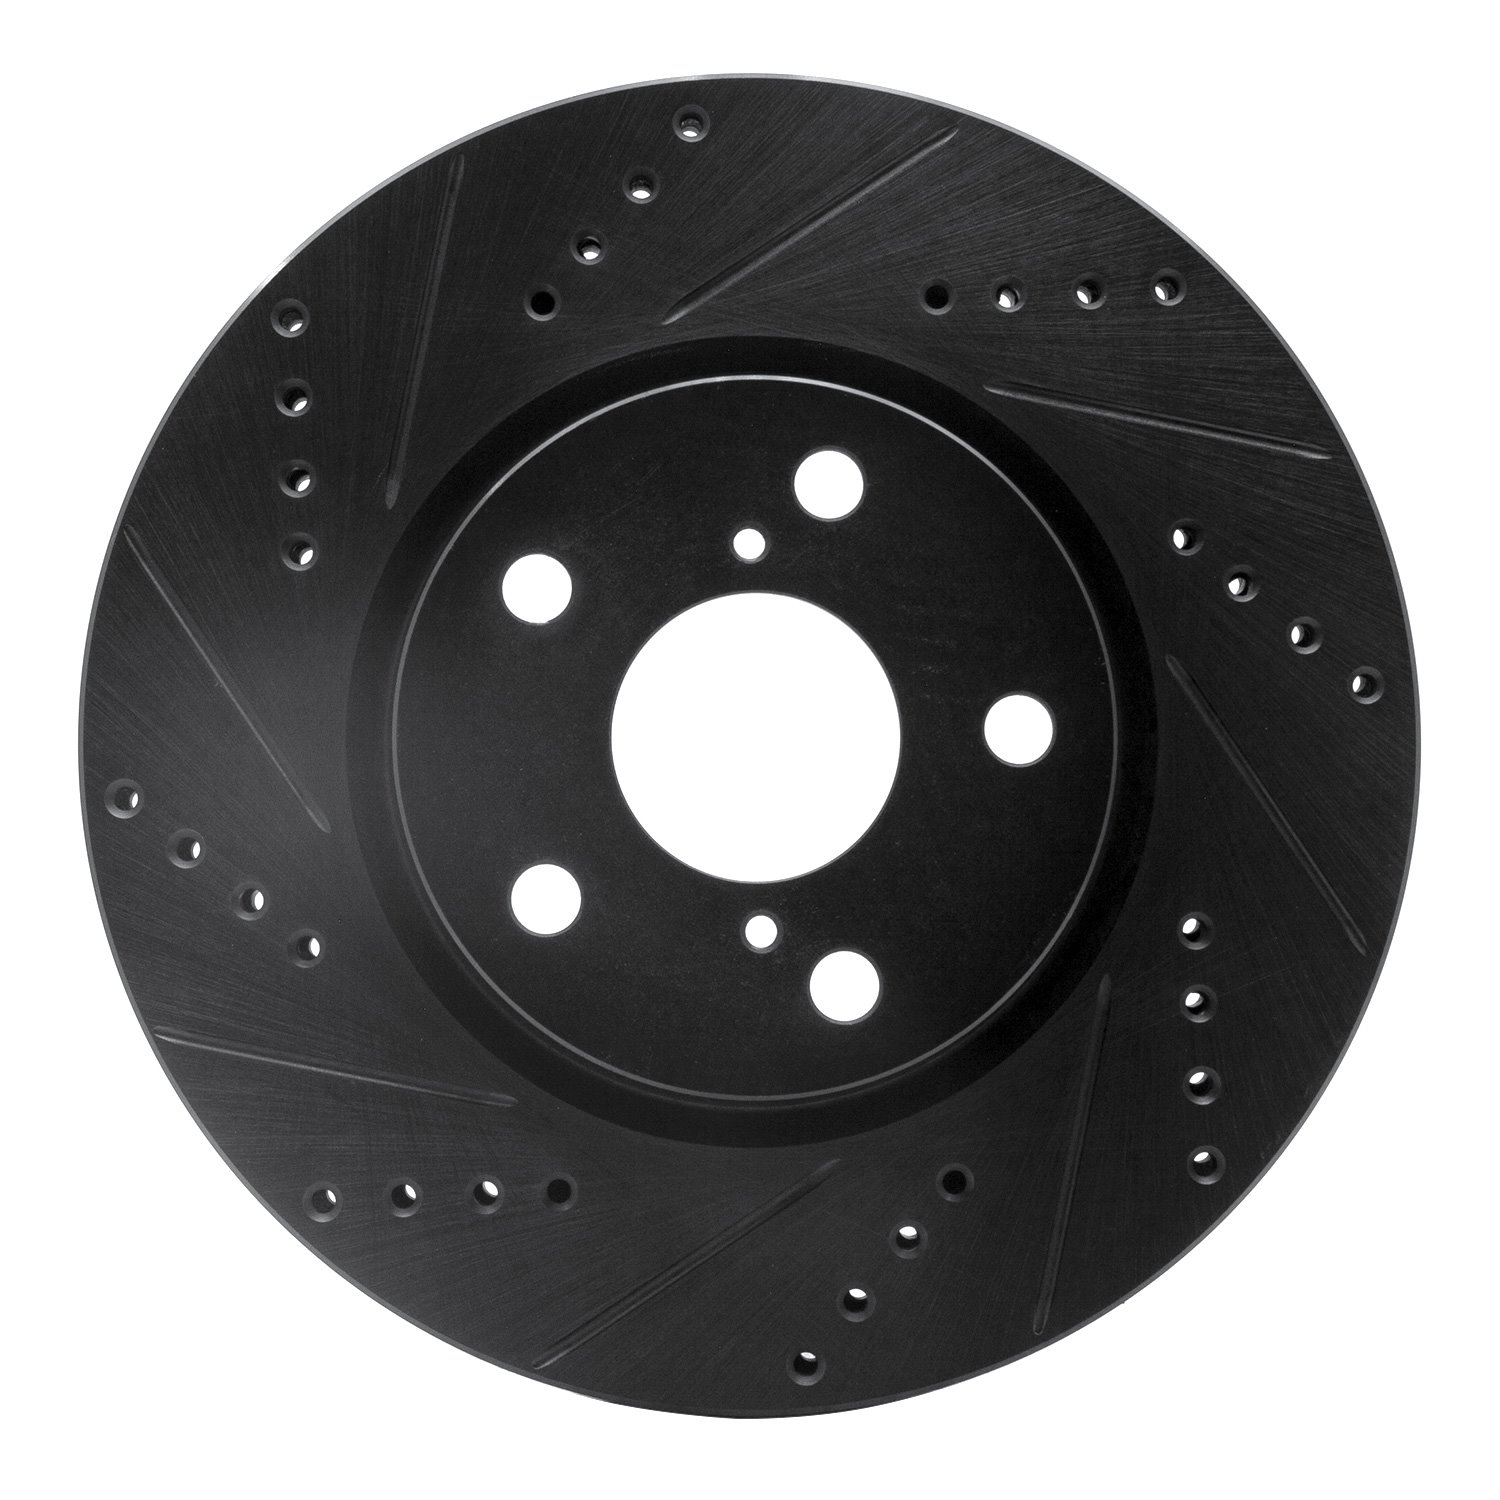 E-Line Drilled & Slotted Black Brake Rotor, Fits Select Fits Multiple Makes/Models, Position: Right Front